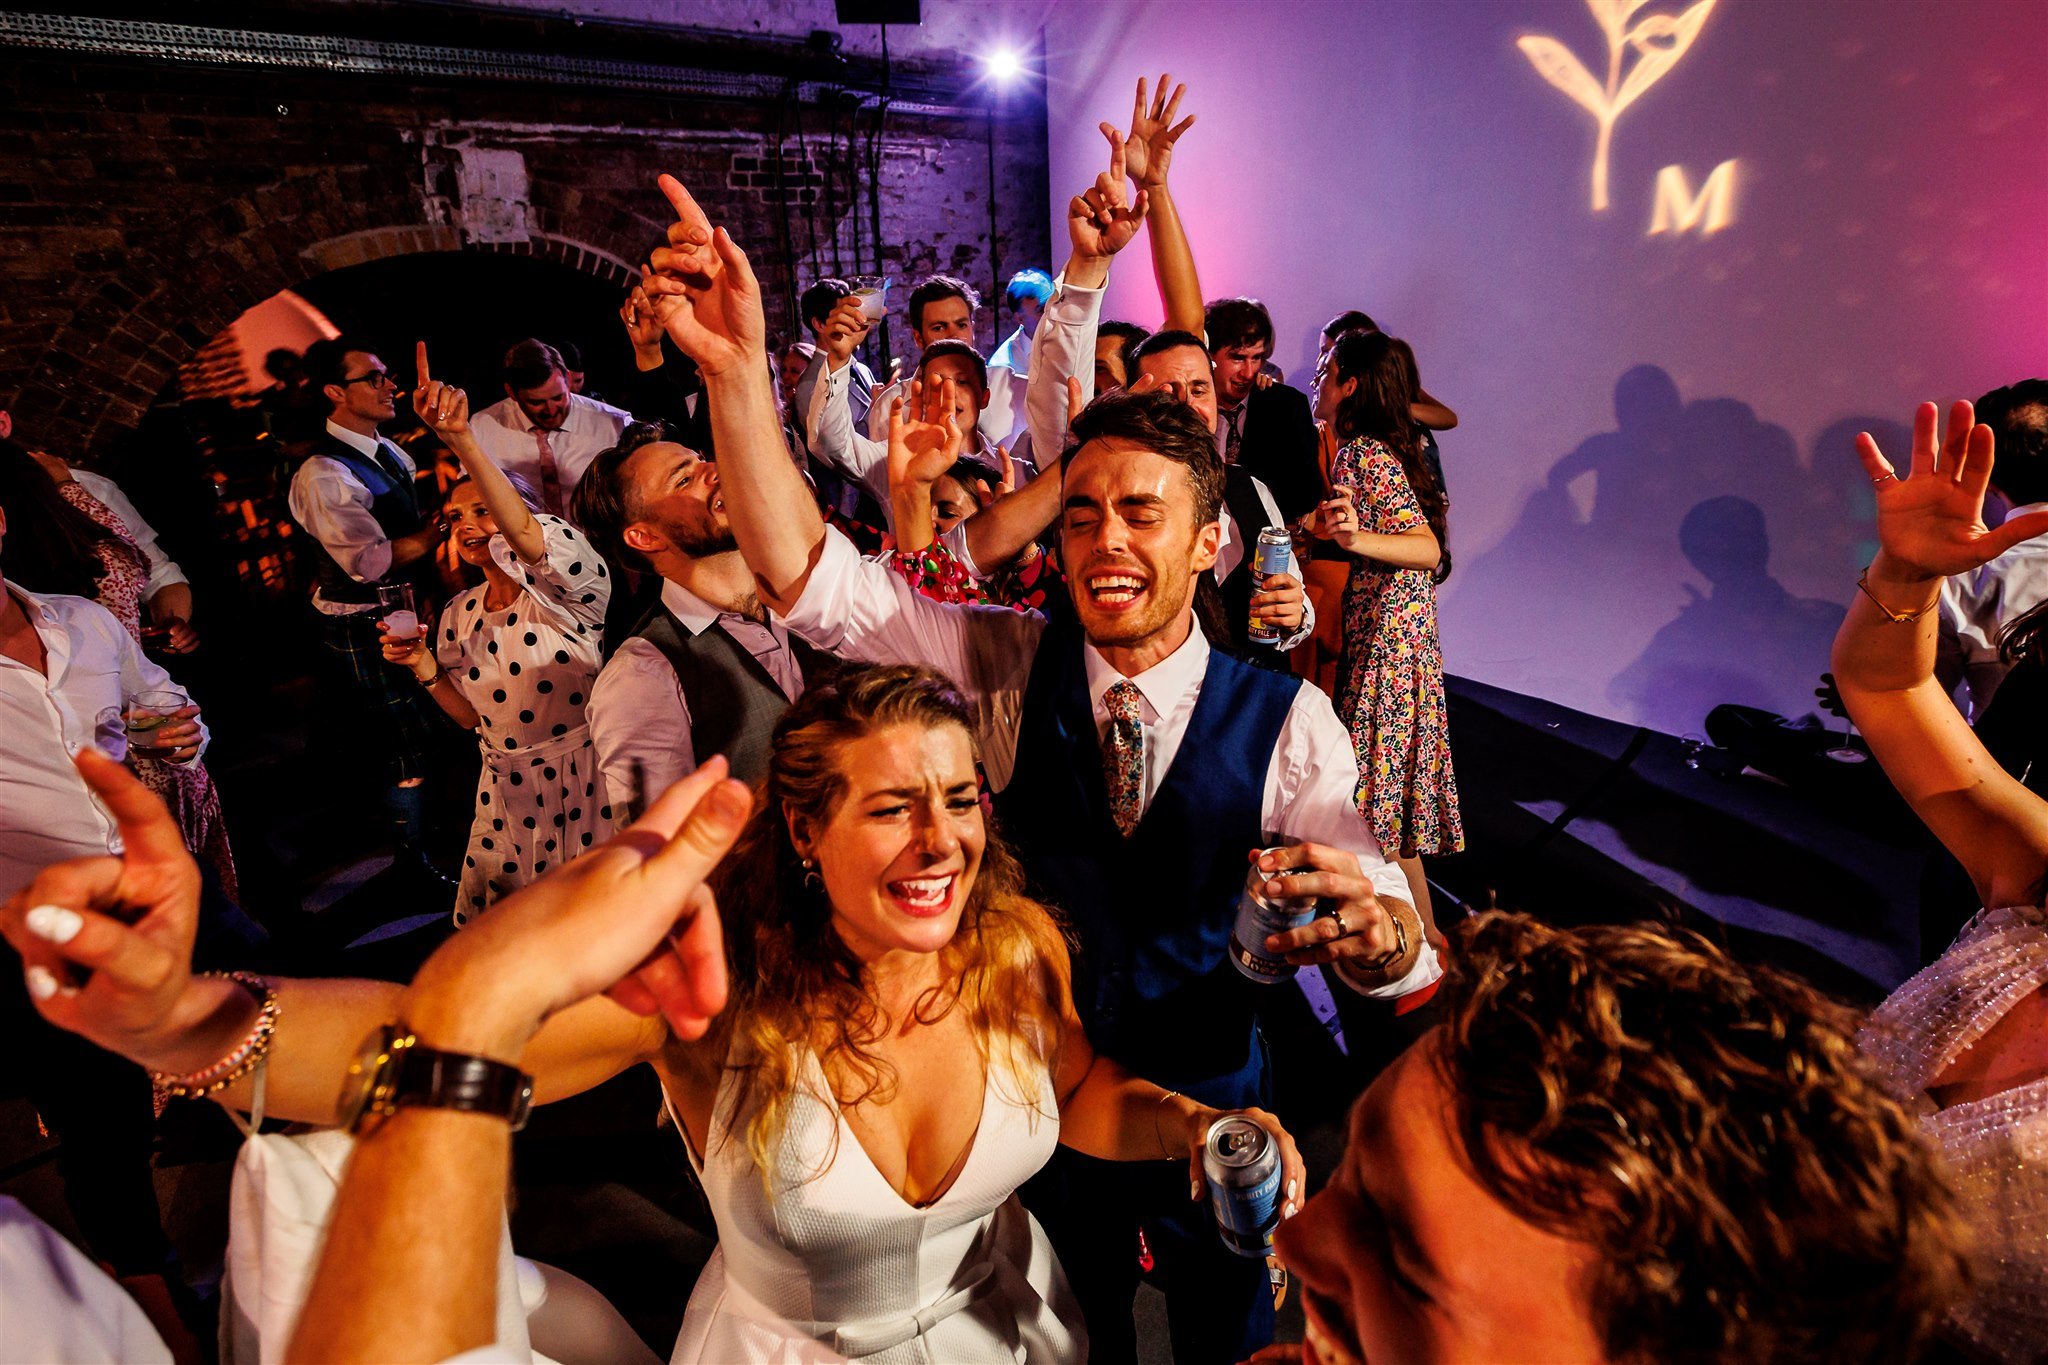 Jess and Matt - Shoreditch Studios - Party Vibes - Dance Floor Wedding Party Dita Rosted Events Coordination - Lina & Tom Photography.jpg